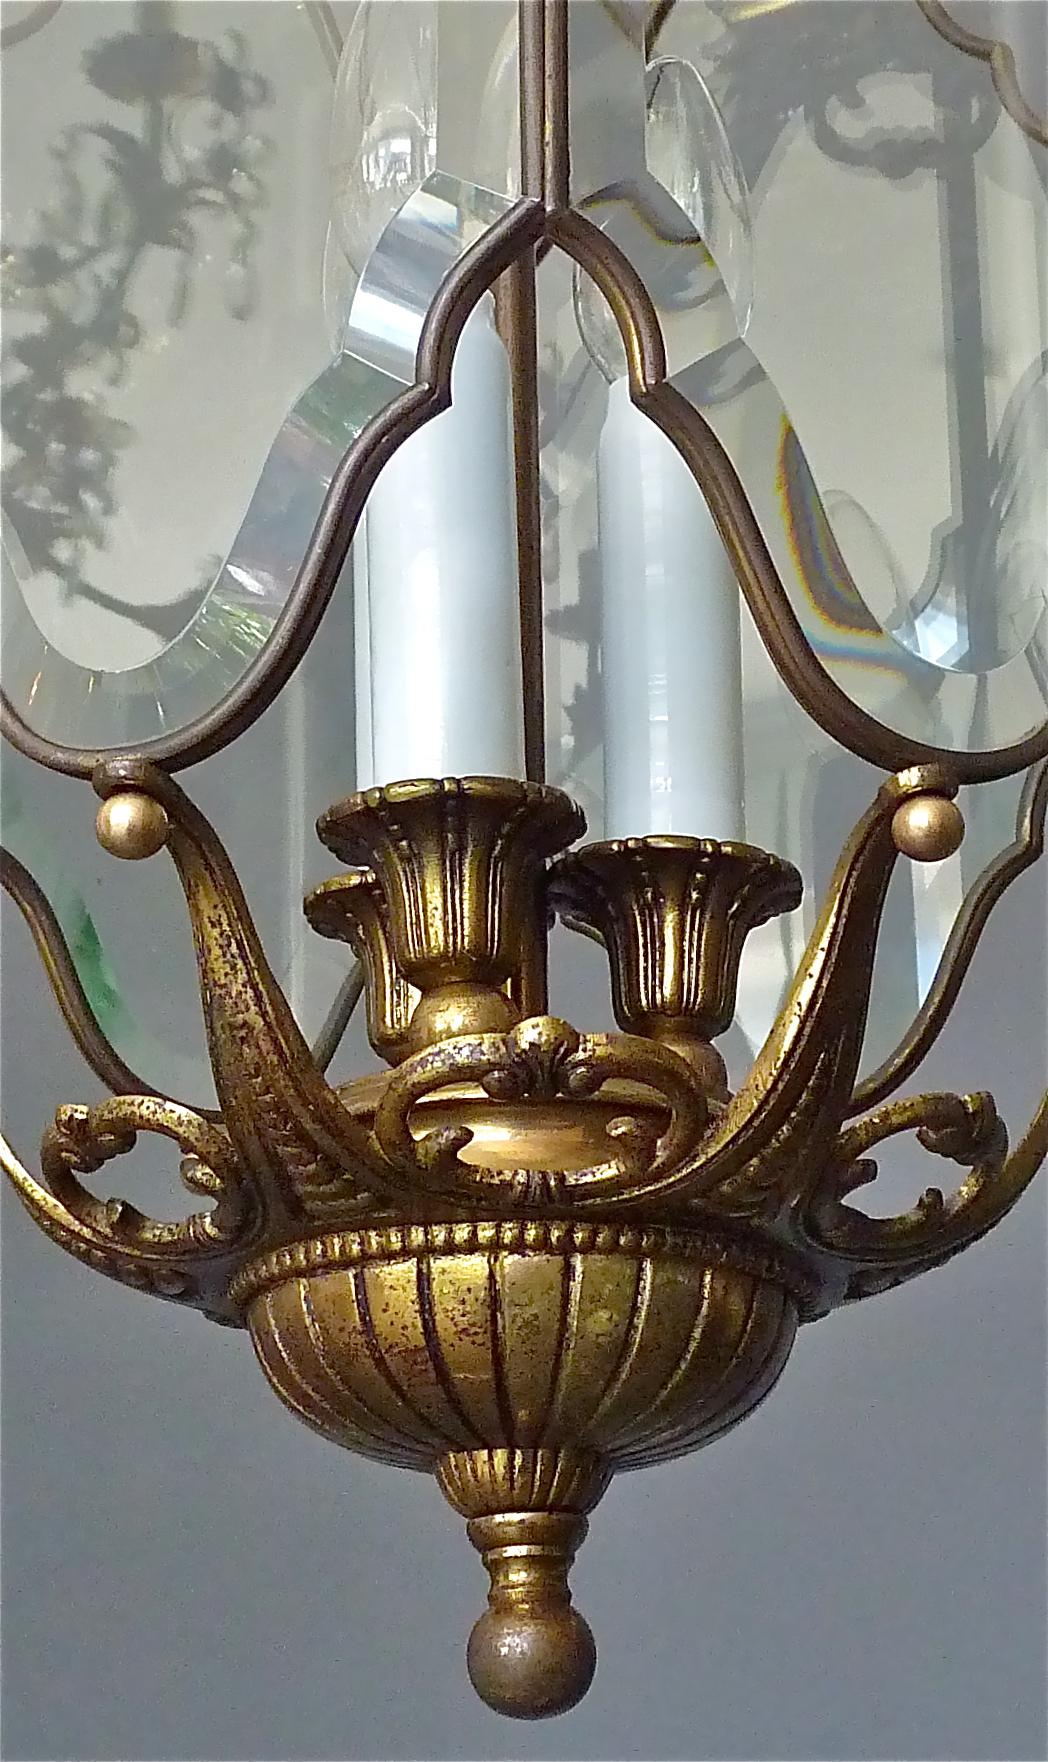 Large Antique French Lantern Lamp Faceted Crystal Glass Bronze Brass 1880 - 1900 For Sale 3